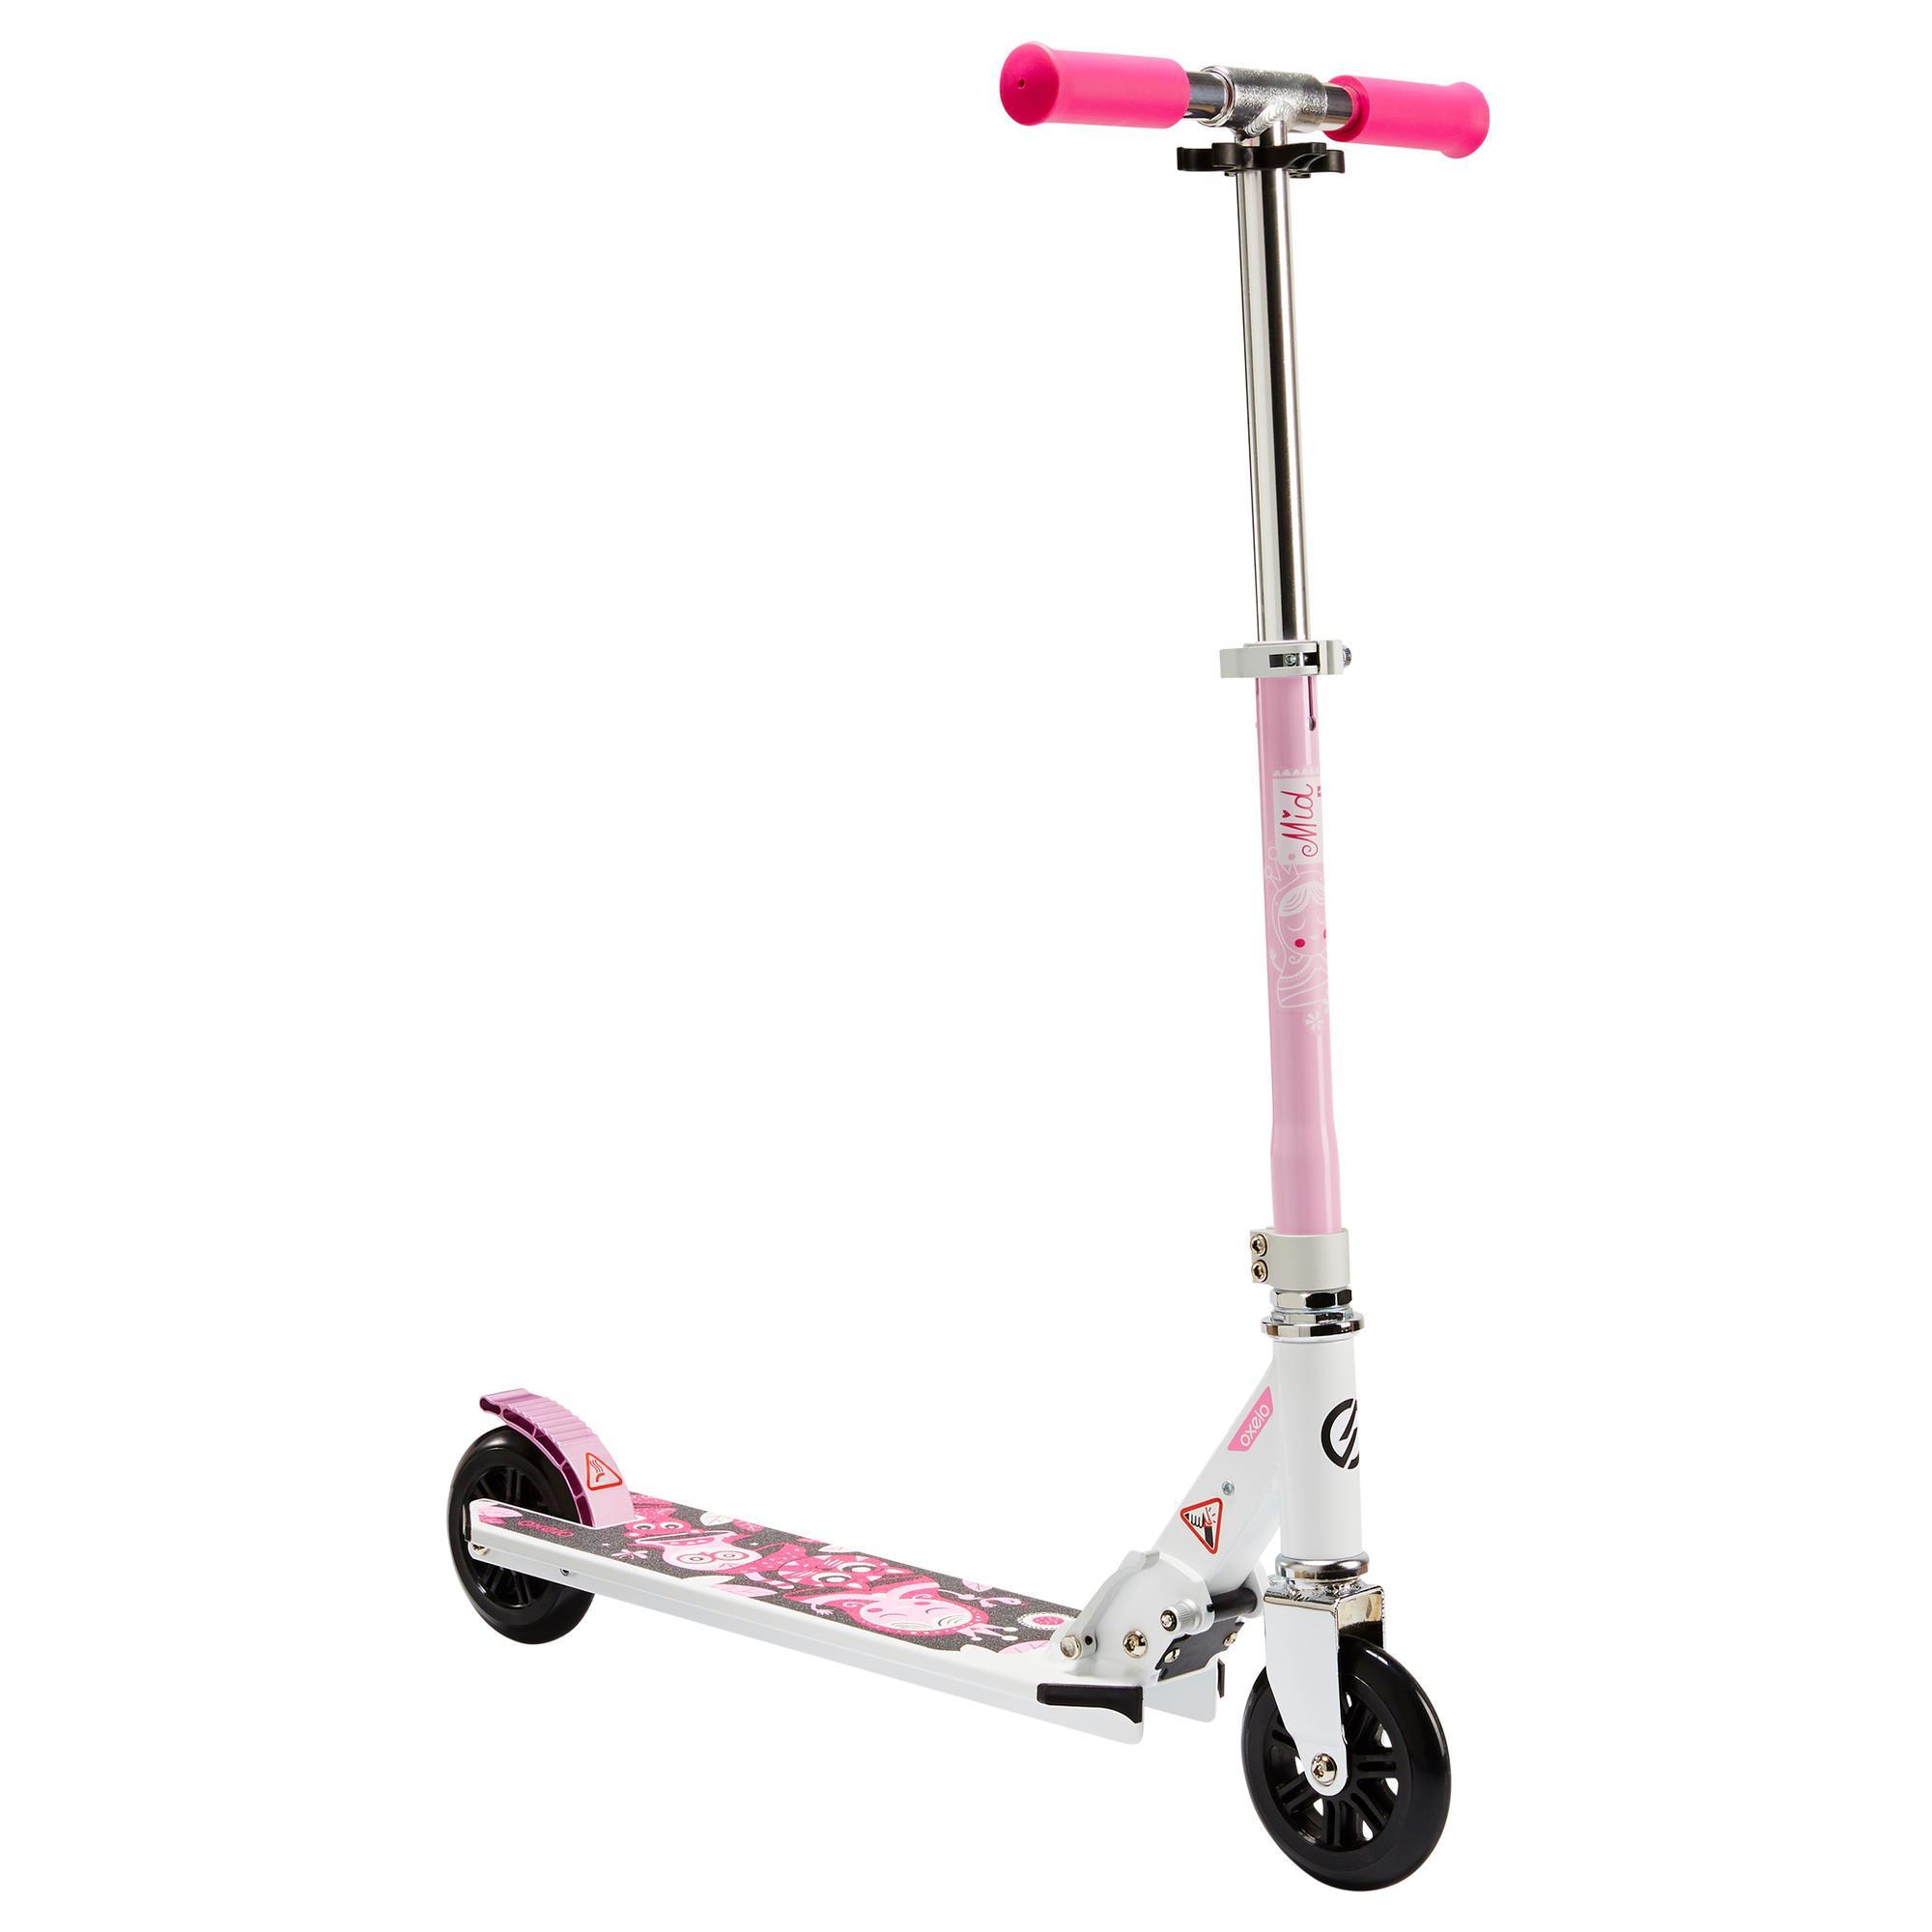 OXELO Scooter Roller Kinder Mid 1 weiss/rosa ALU